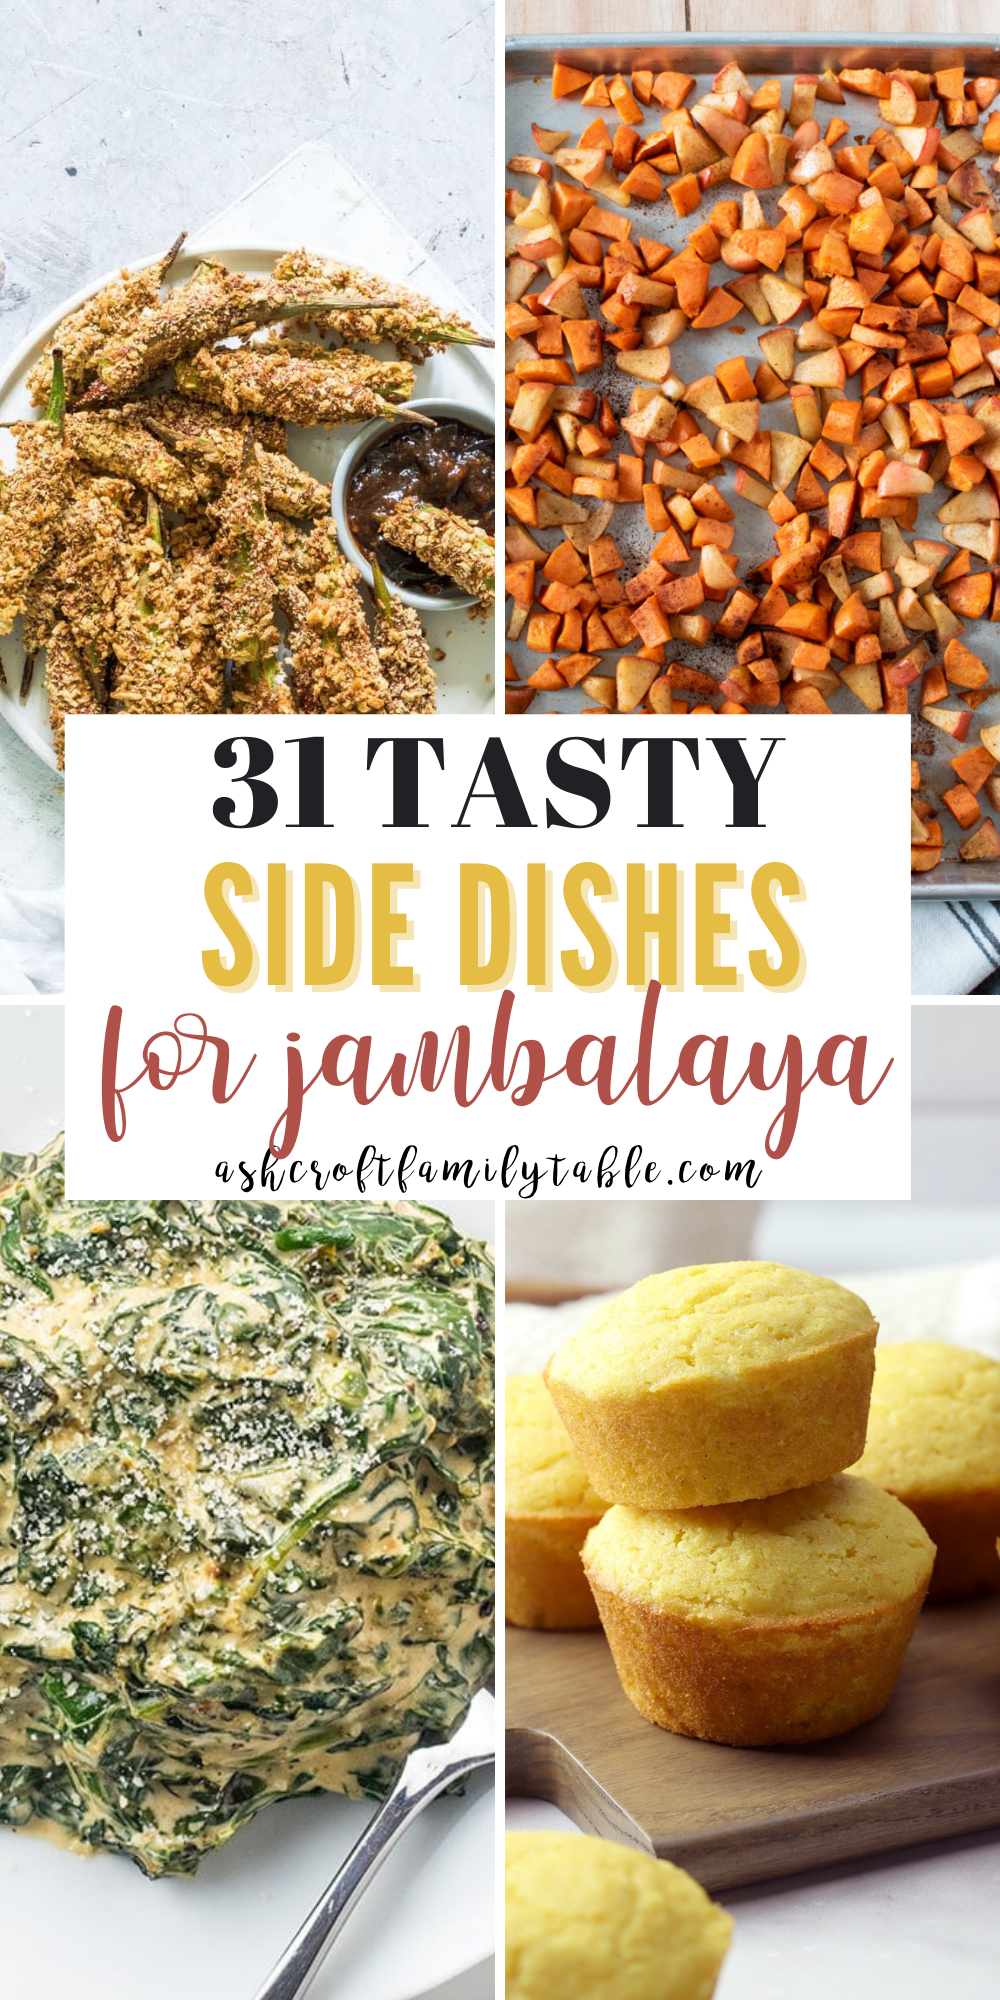 Here are 31 delicious sides for jambalaya that you can make for dinner!